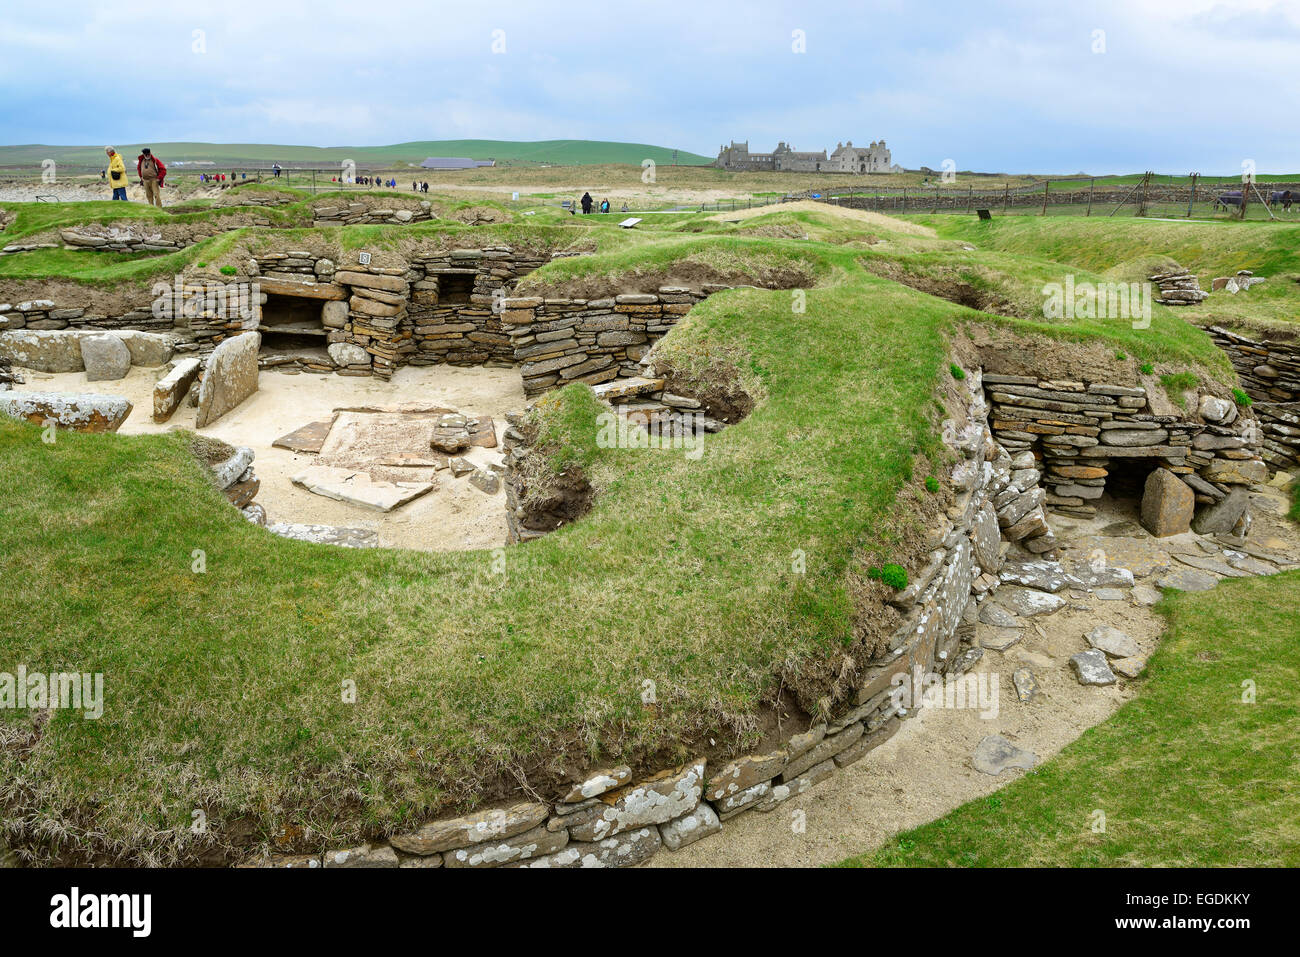 Tourists visiting the Neolithic settlement Skara Brae, Skara Brae, UNESCO World Heritage Site The Heart of Neolithic Orkney, Orkney Islands, Scotland, Great Britain, United Kingdom Stock Photo